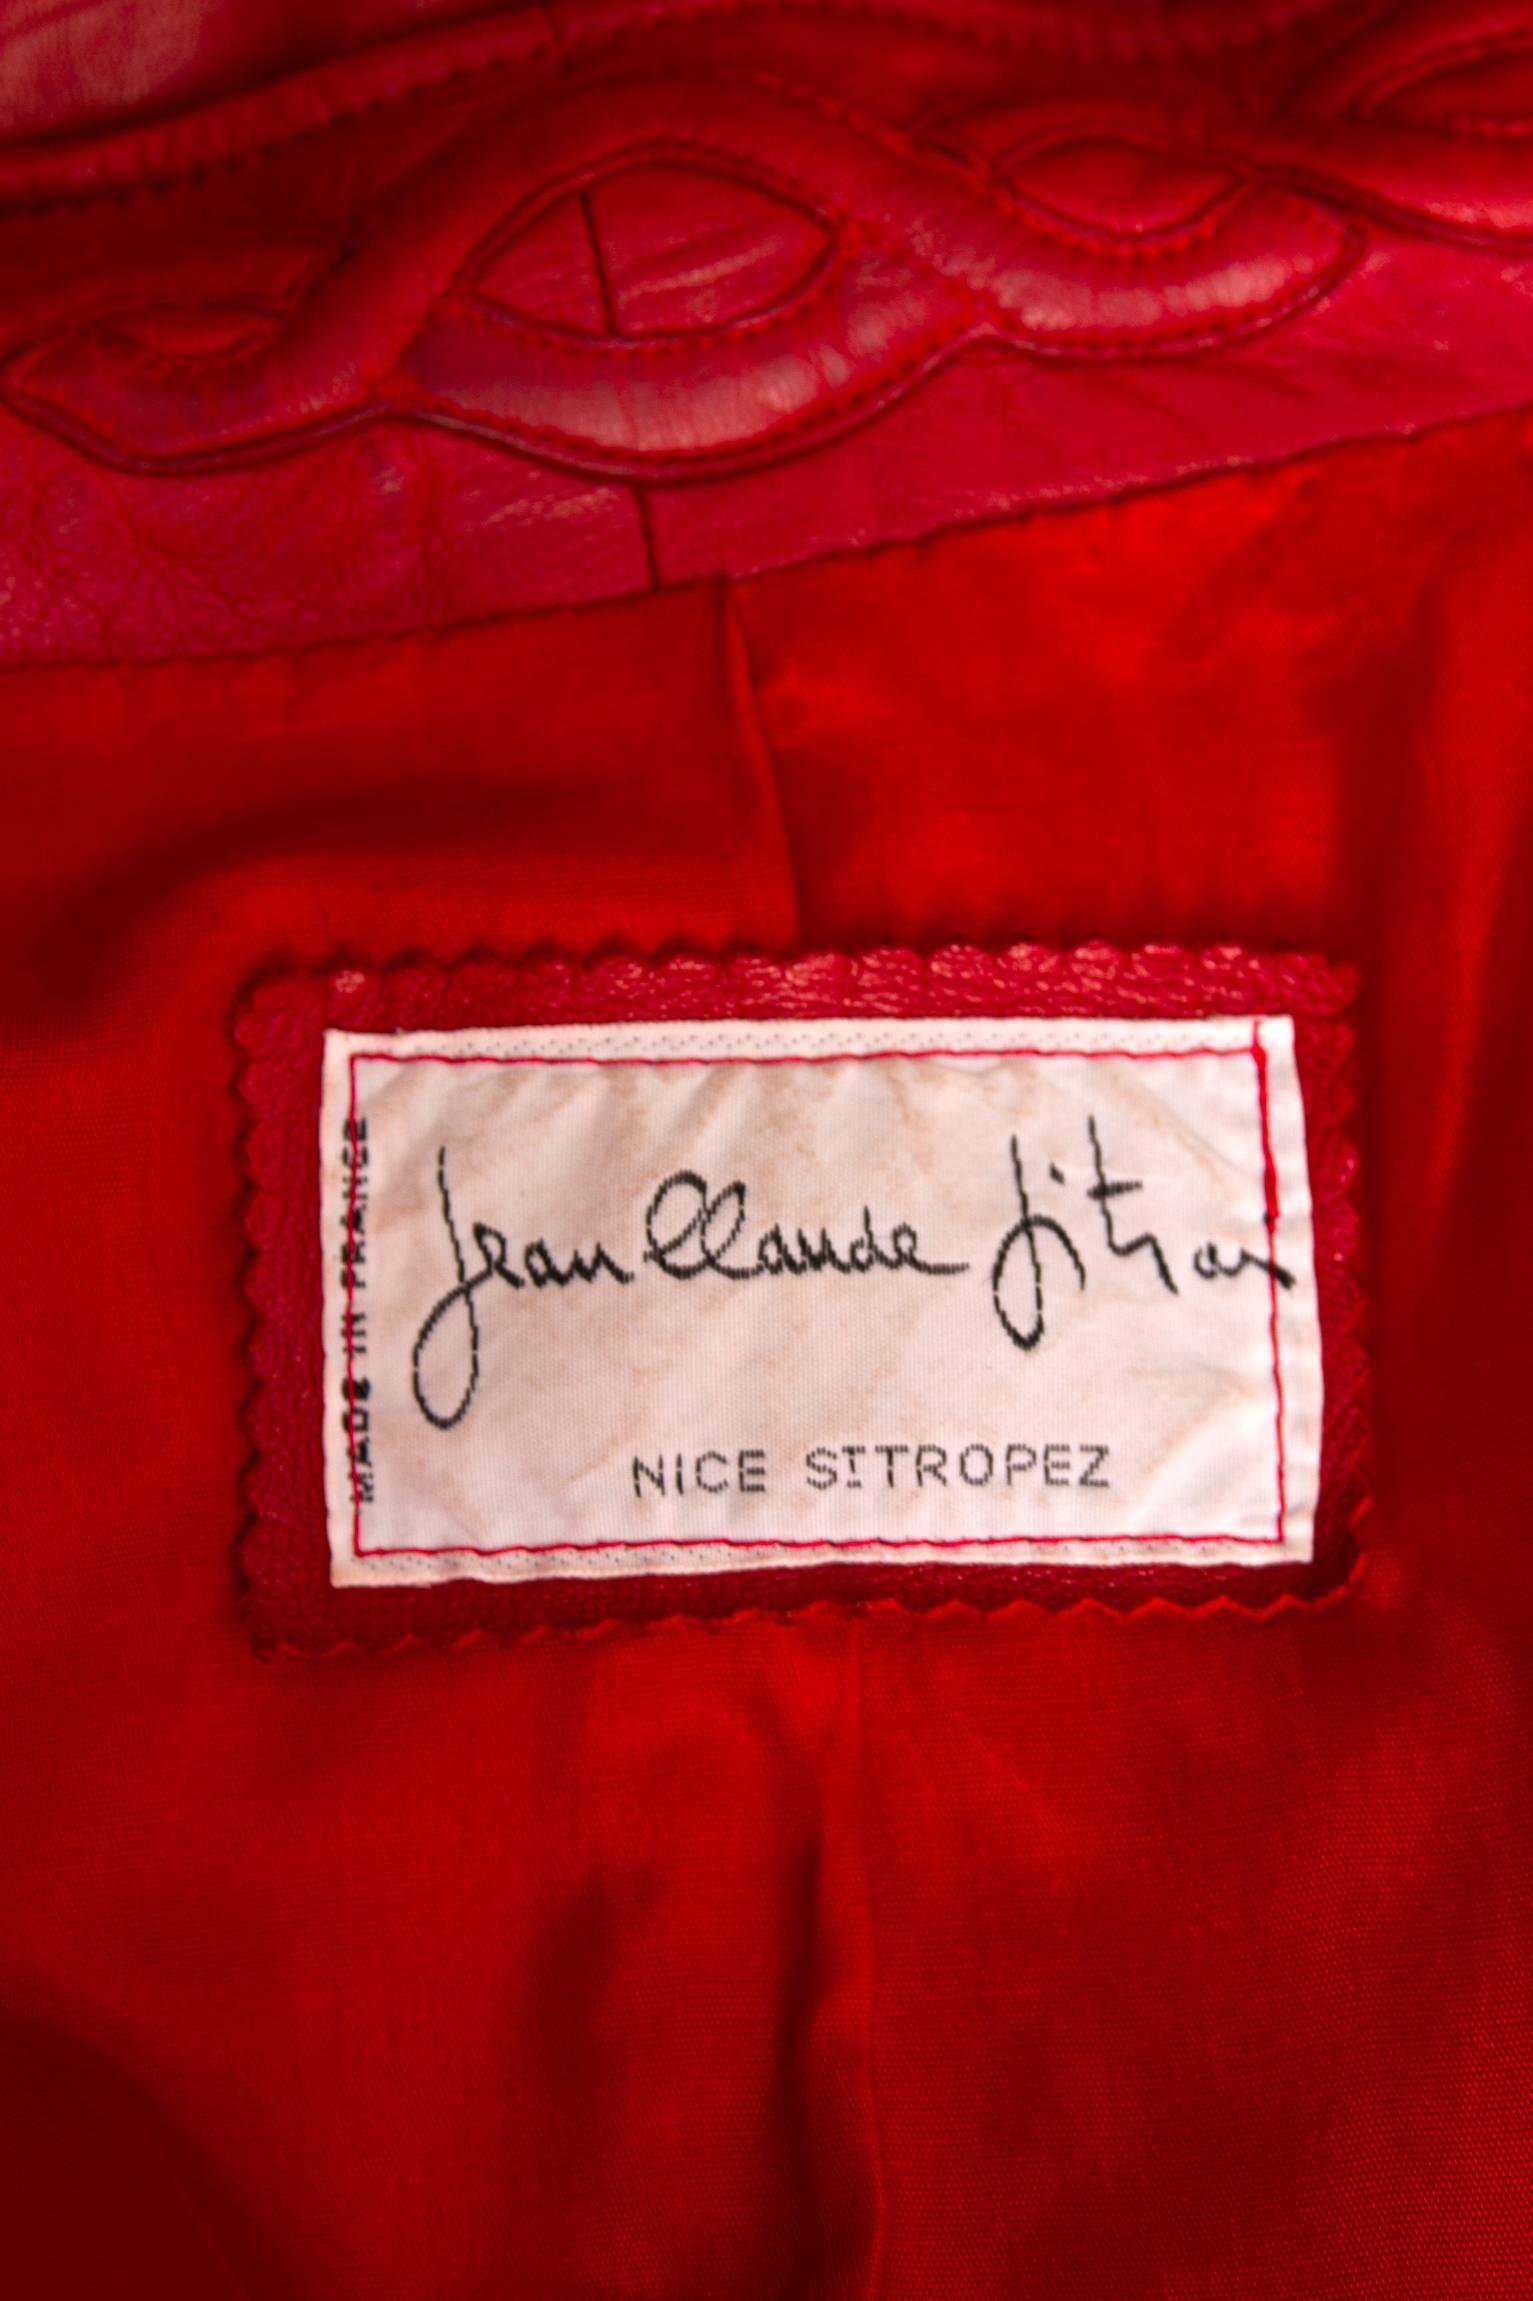 An incredible soft and glamorous 1980s Jean Claude Jitrois bright read leather jacket with exaggerated shoulders, voluminous sleeves and an open front which can be held in place by a matching detachable waist belt. The slim collar features a braided